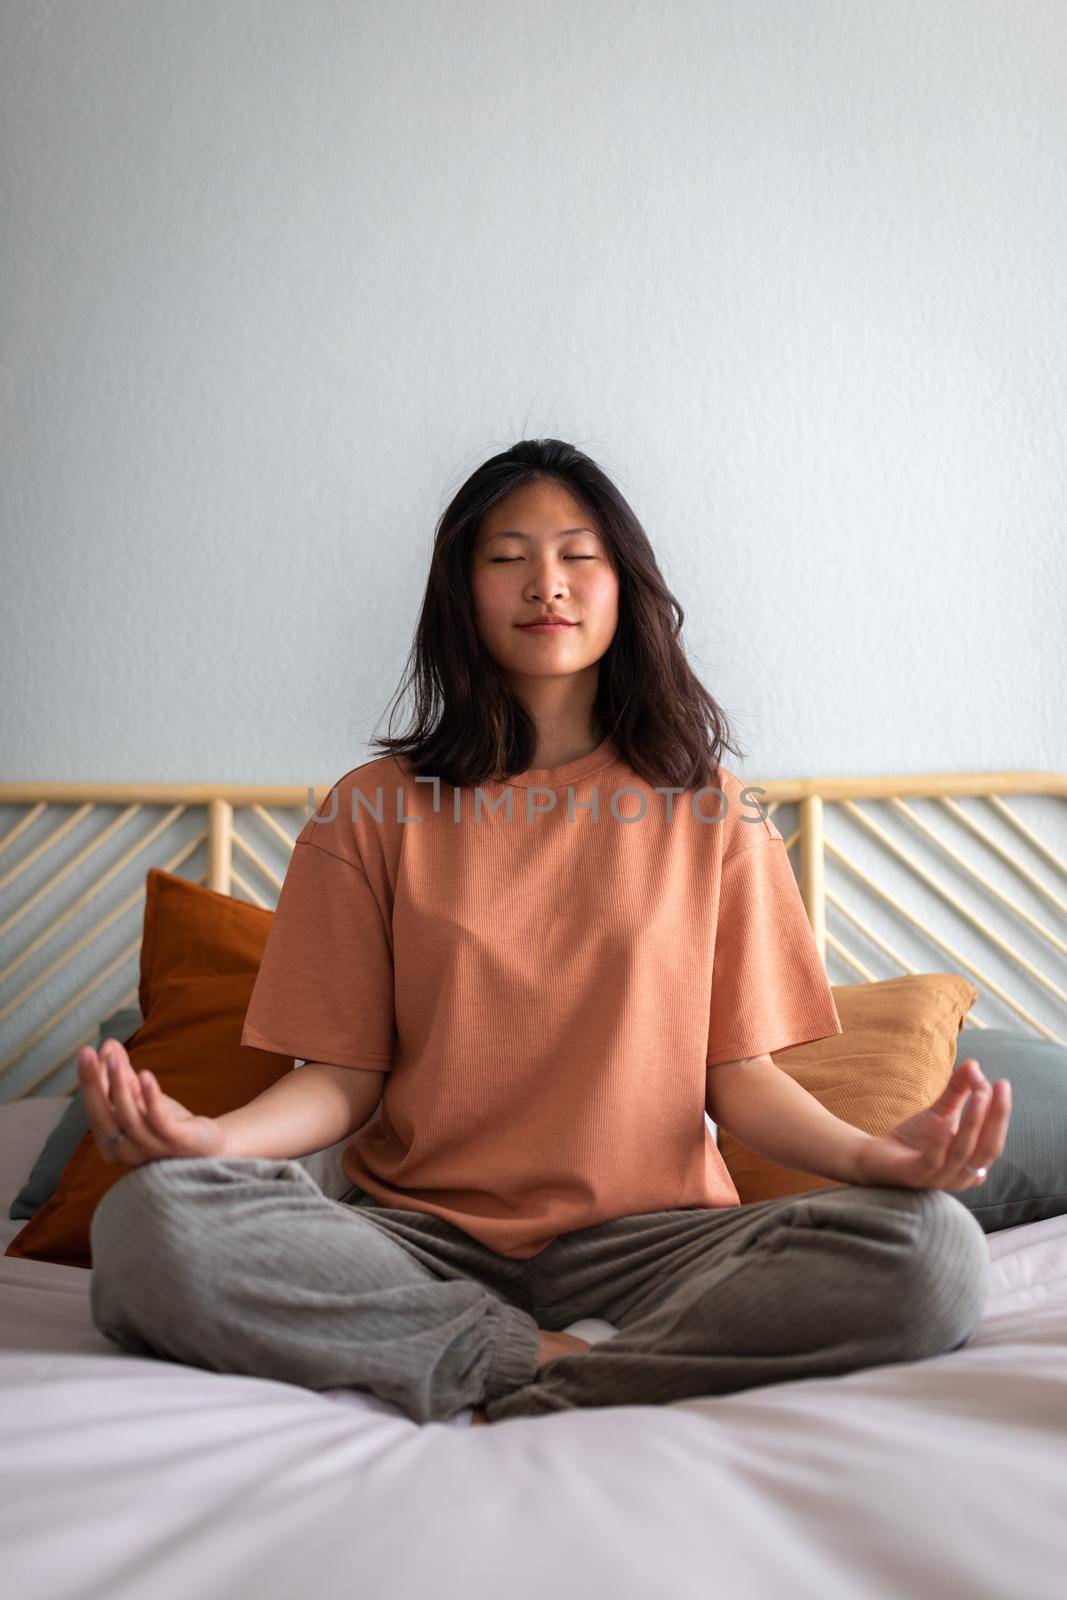 Front view vertical portrait of asian college student young woman meditating and doing breathing exercises on the bed in the morning to clear mind before day starts. Wellness and meditation concept.